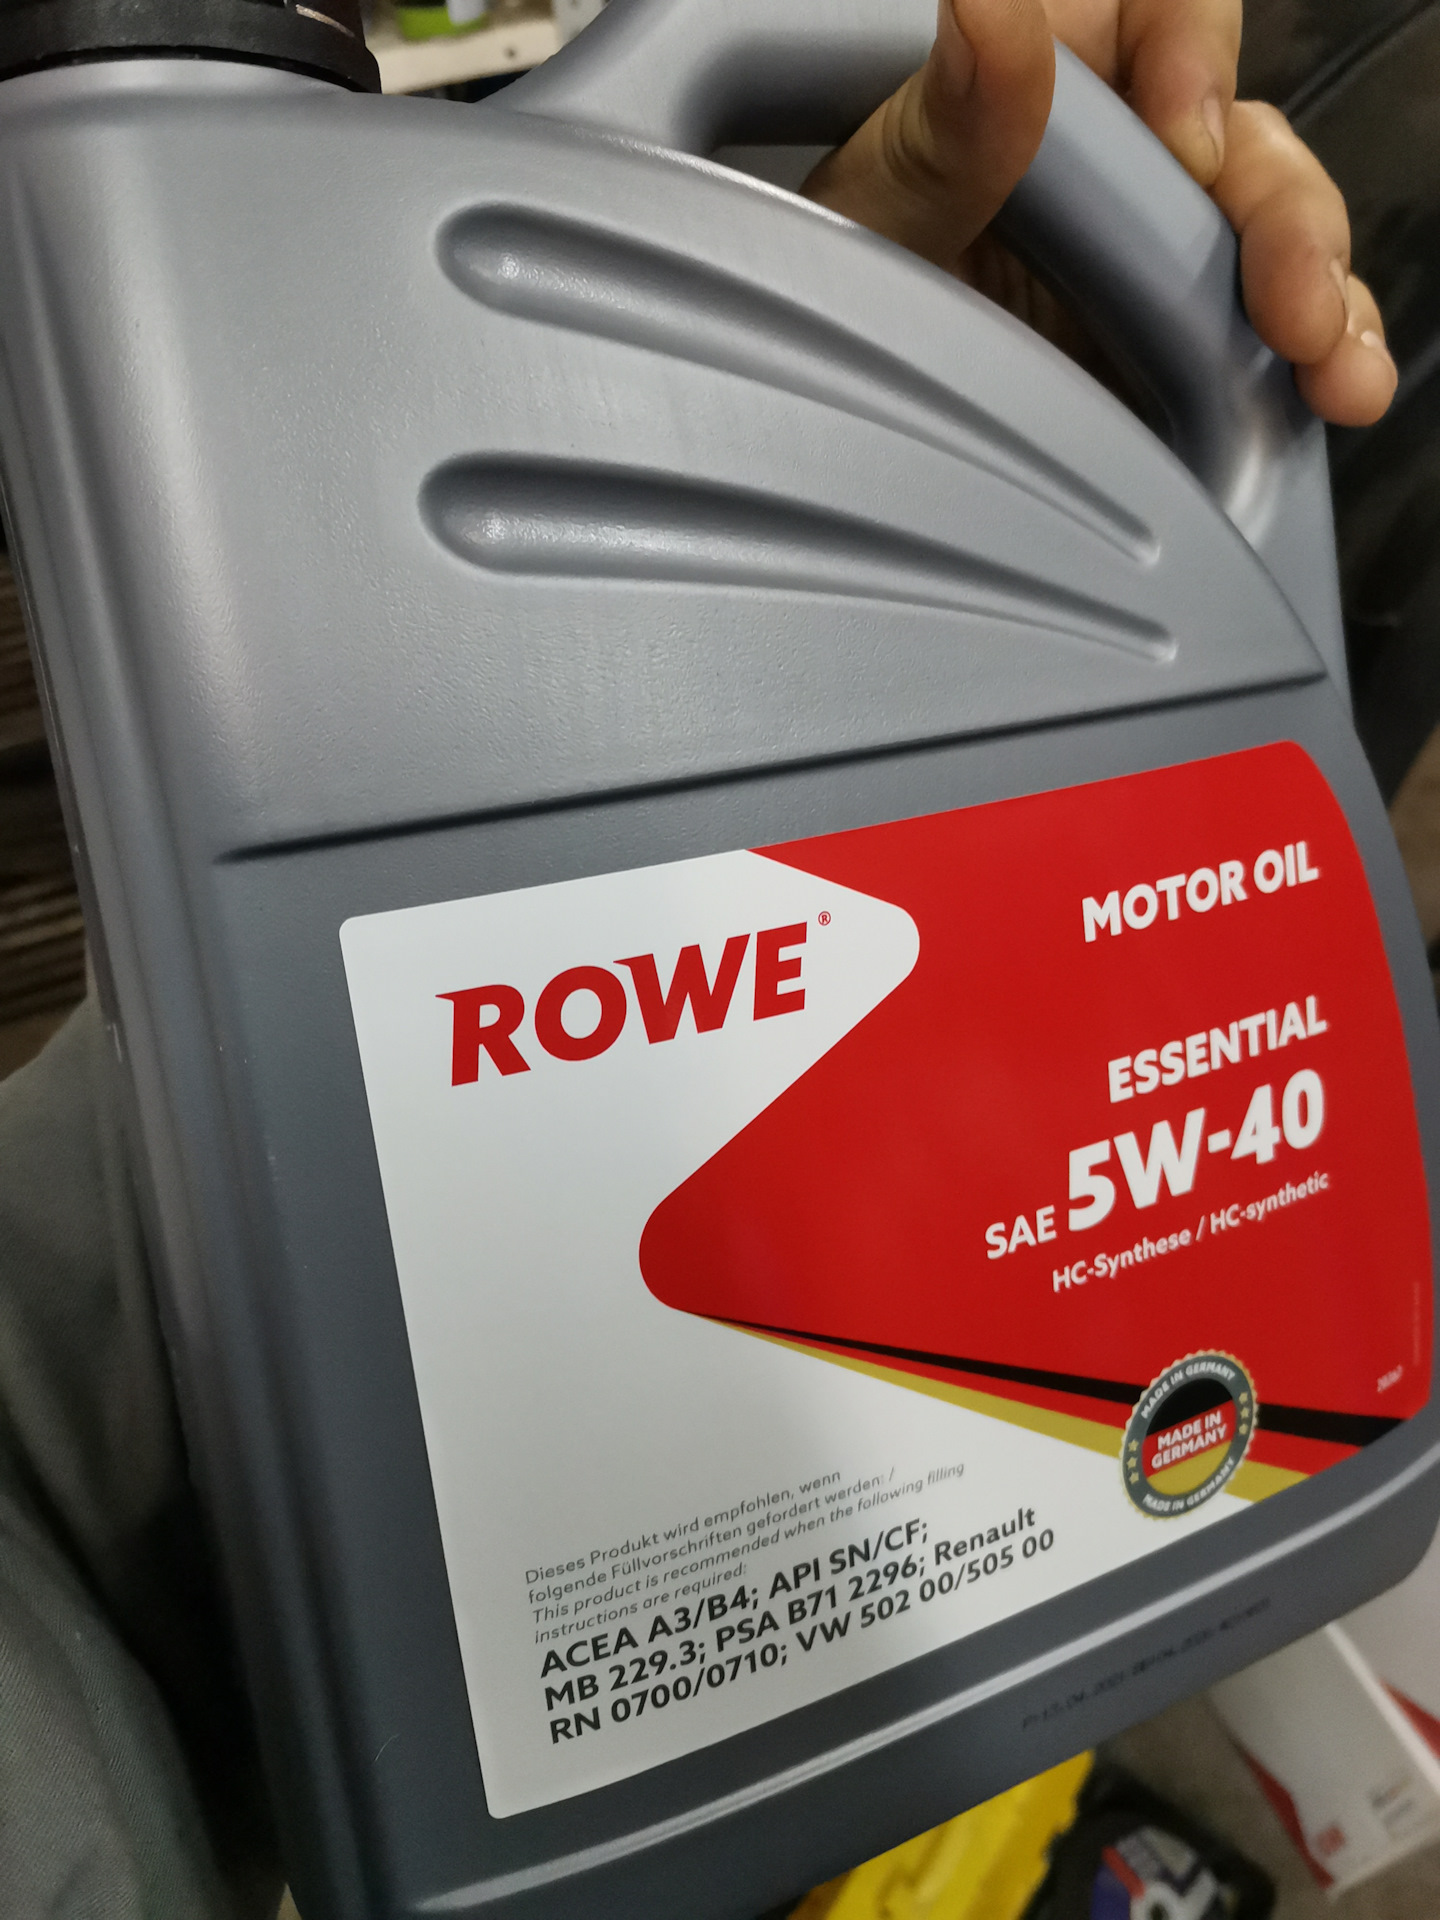 Rove масло. Масло Rowe 5w40. Rowe 5-40. Масло Rowe 5w30. Rowe Essential 5w40.